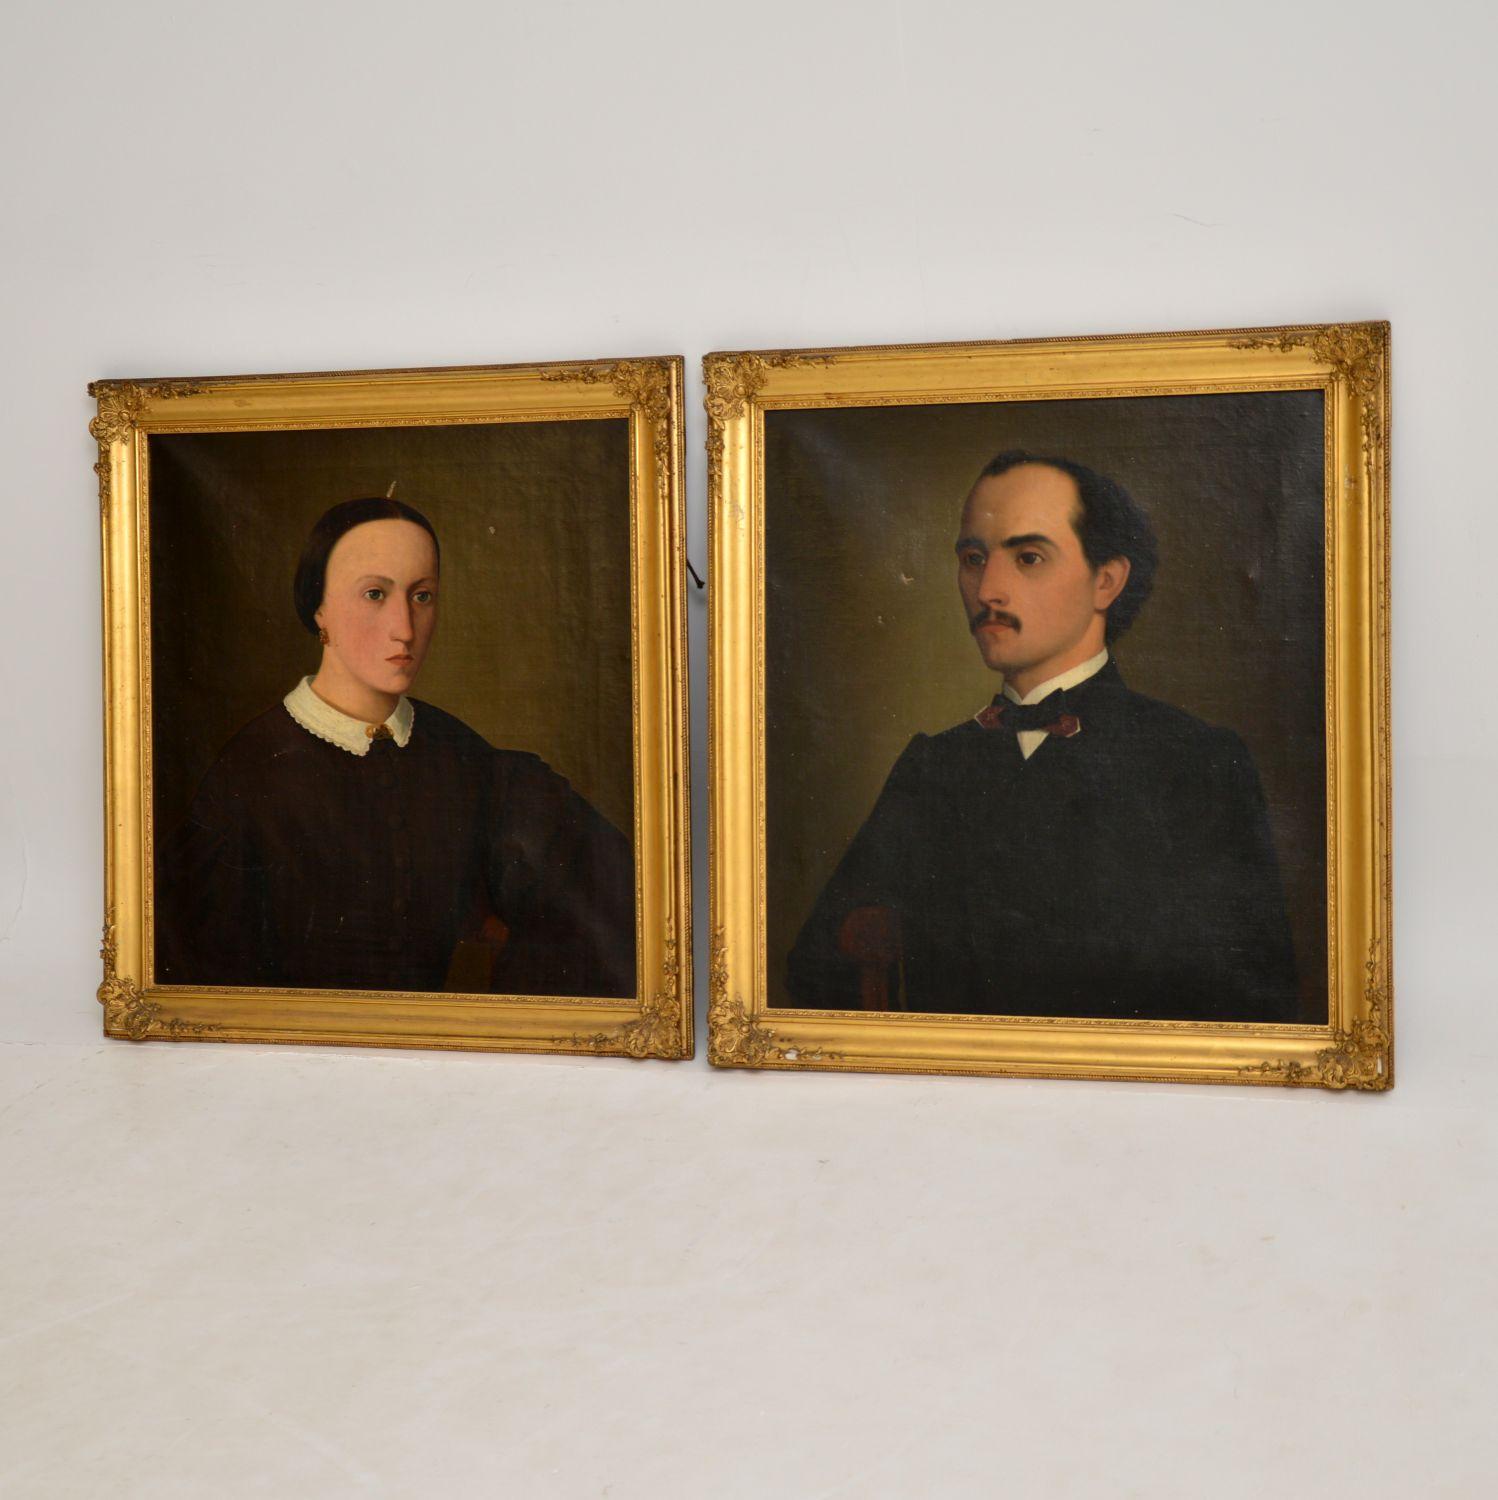 A wonderful pair of antique oil paintings in original gilt frames. These are most likely English and date from the mid-19th century.

They depict a man and a woman, as they were evidently made at the same time and framed together, so they are most